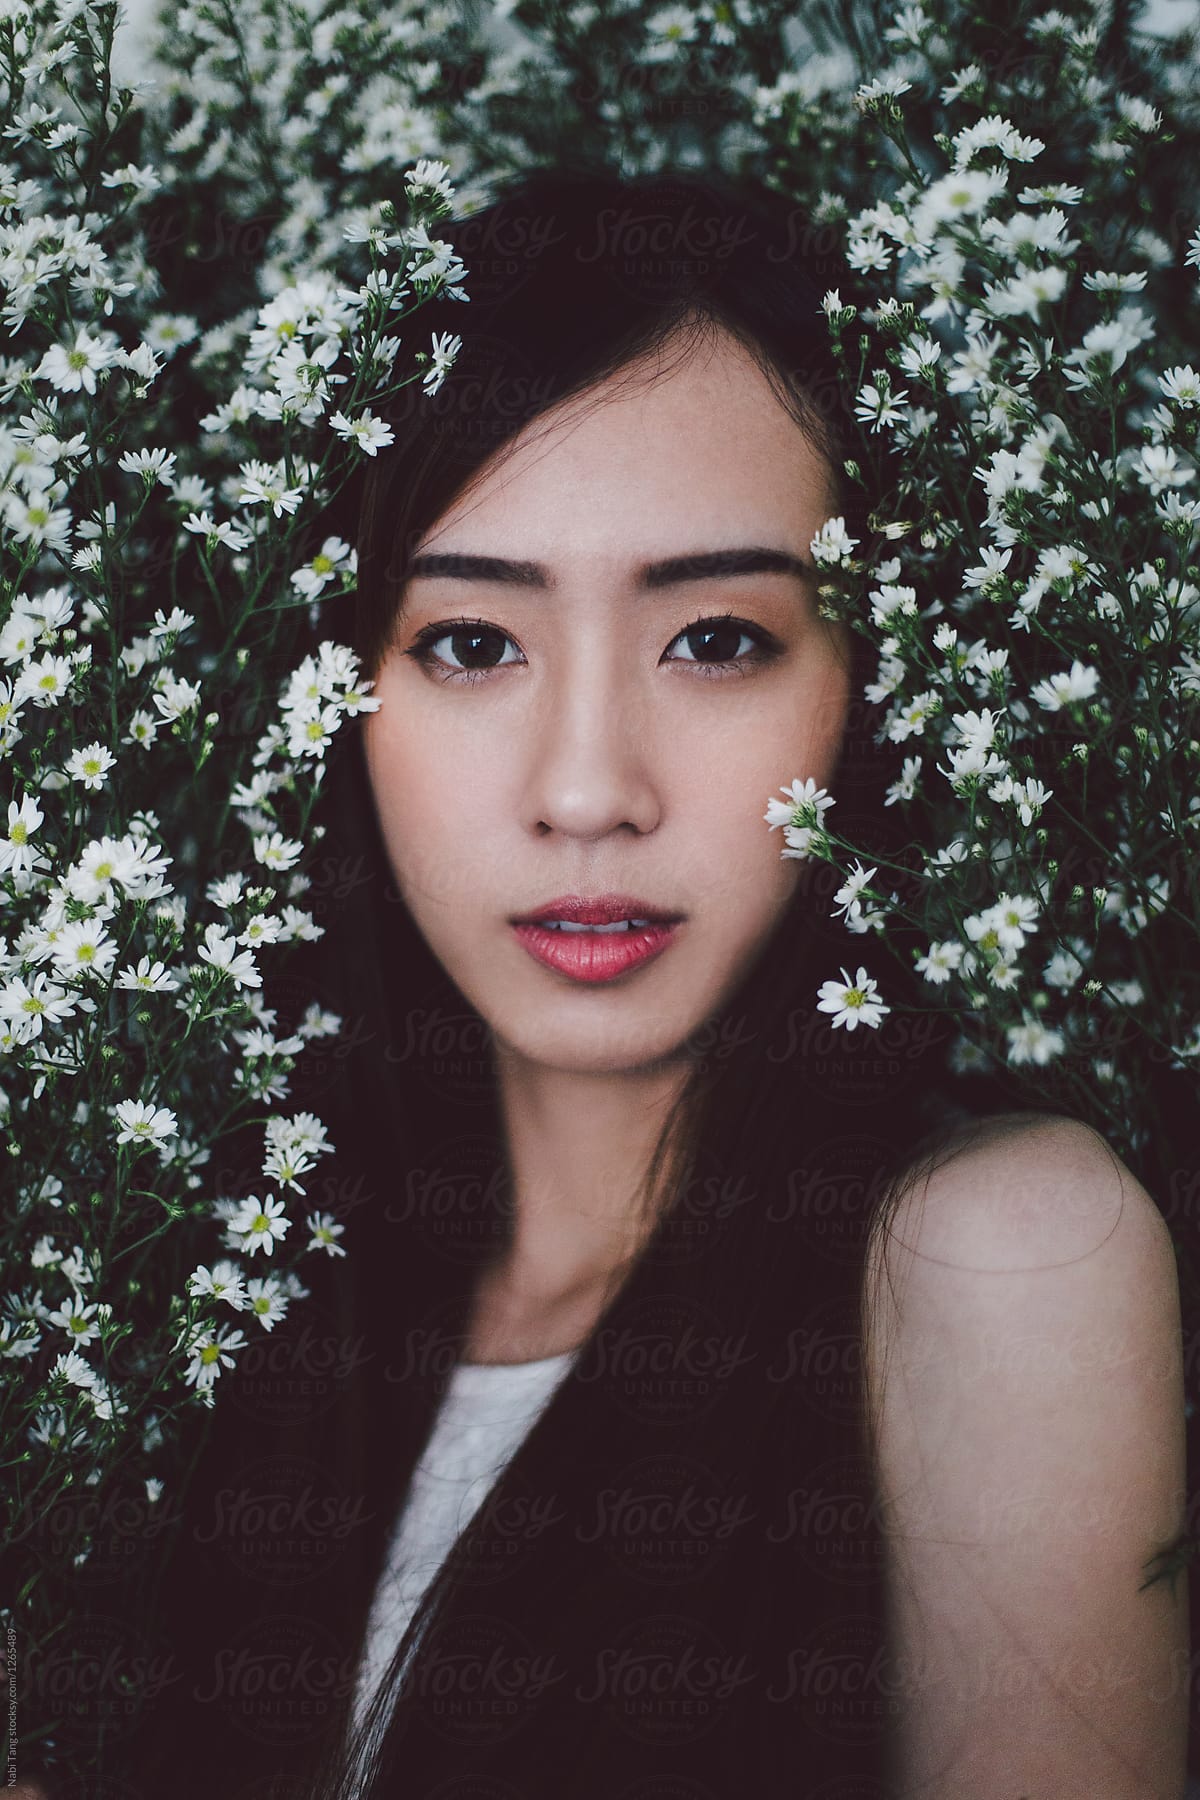 Beautiful Young East Asian Woman Portrait From The Flower Bush By Nabi